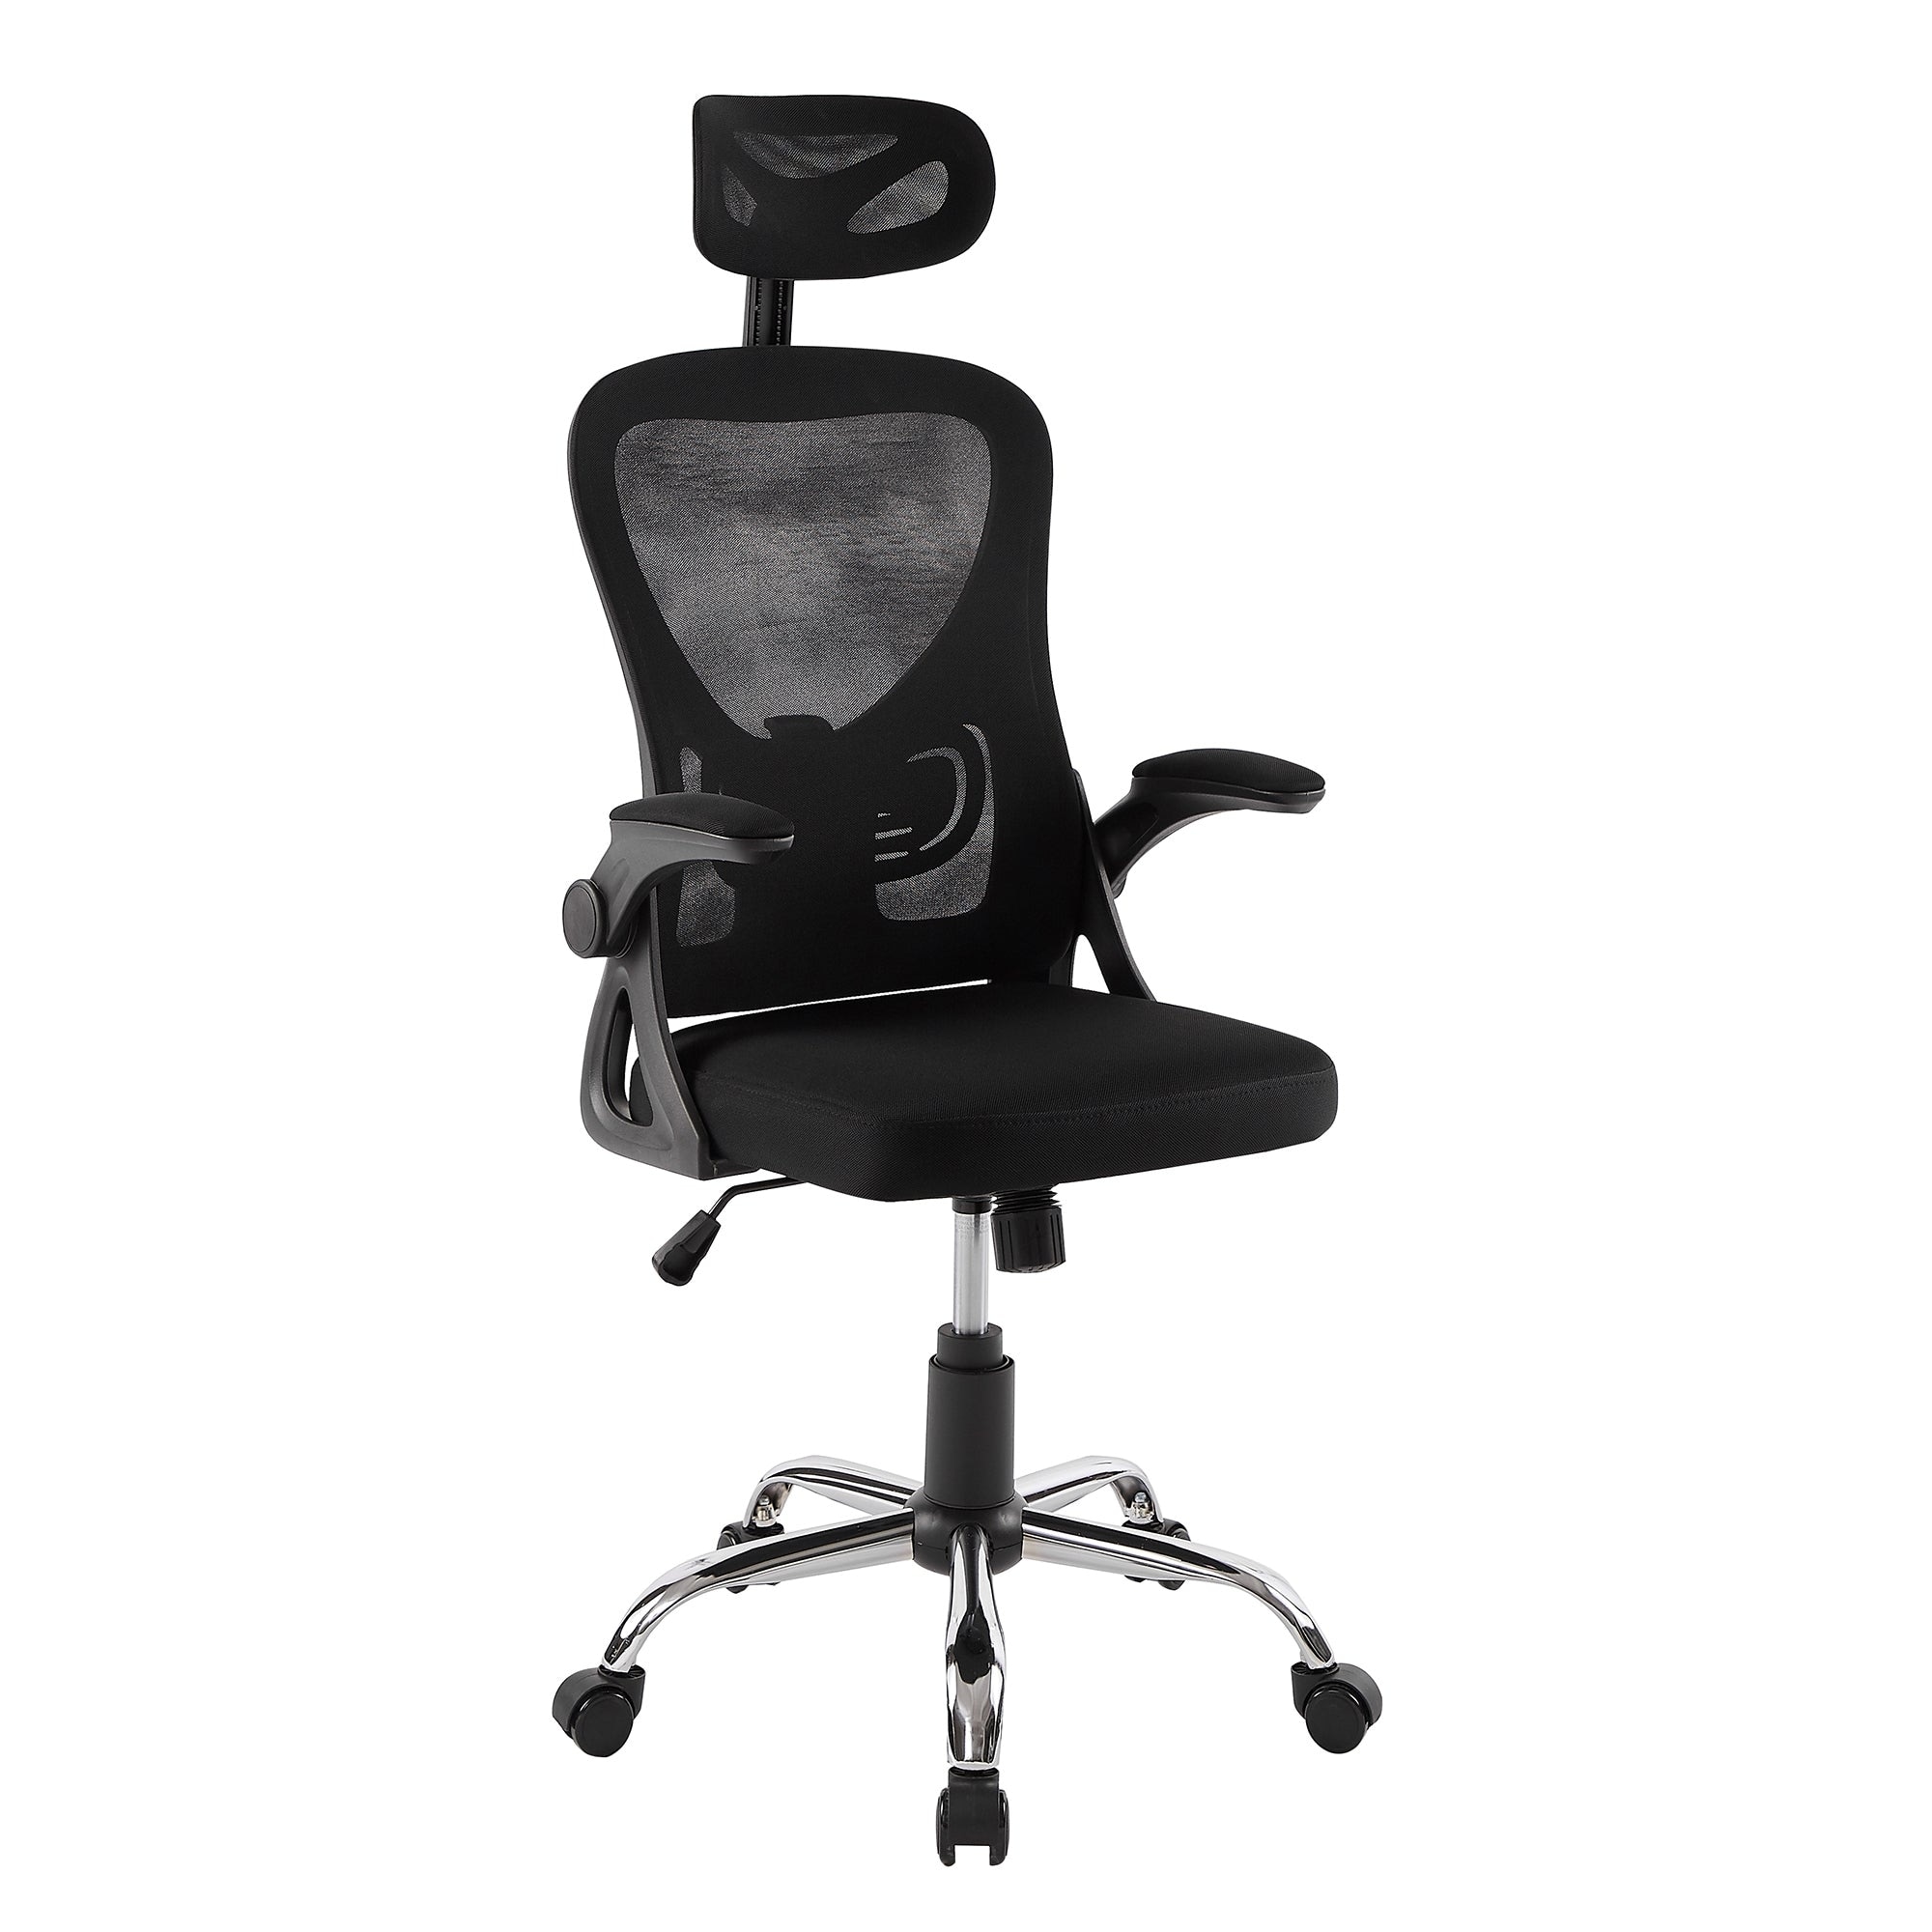 https://ak1.ostkcdn.com/images/products/is/images/direct/10330eb6c5989ded8e99f463973d8513d136b5c5/VECELO-High-Back-Ergonomic-Office-Chair-with-Adjustable-Headrest-Armrest-Mesh-Lumbar-Support.jpg